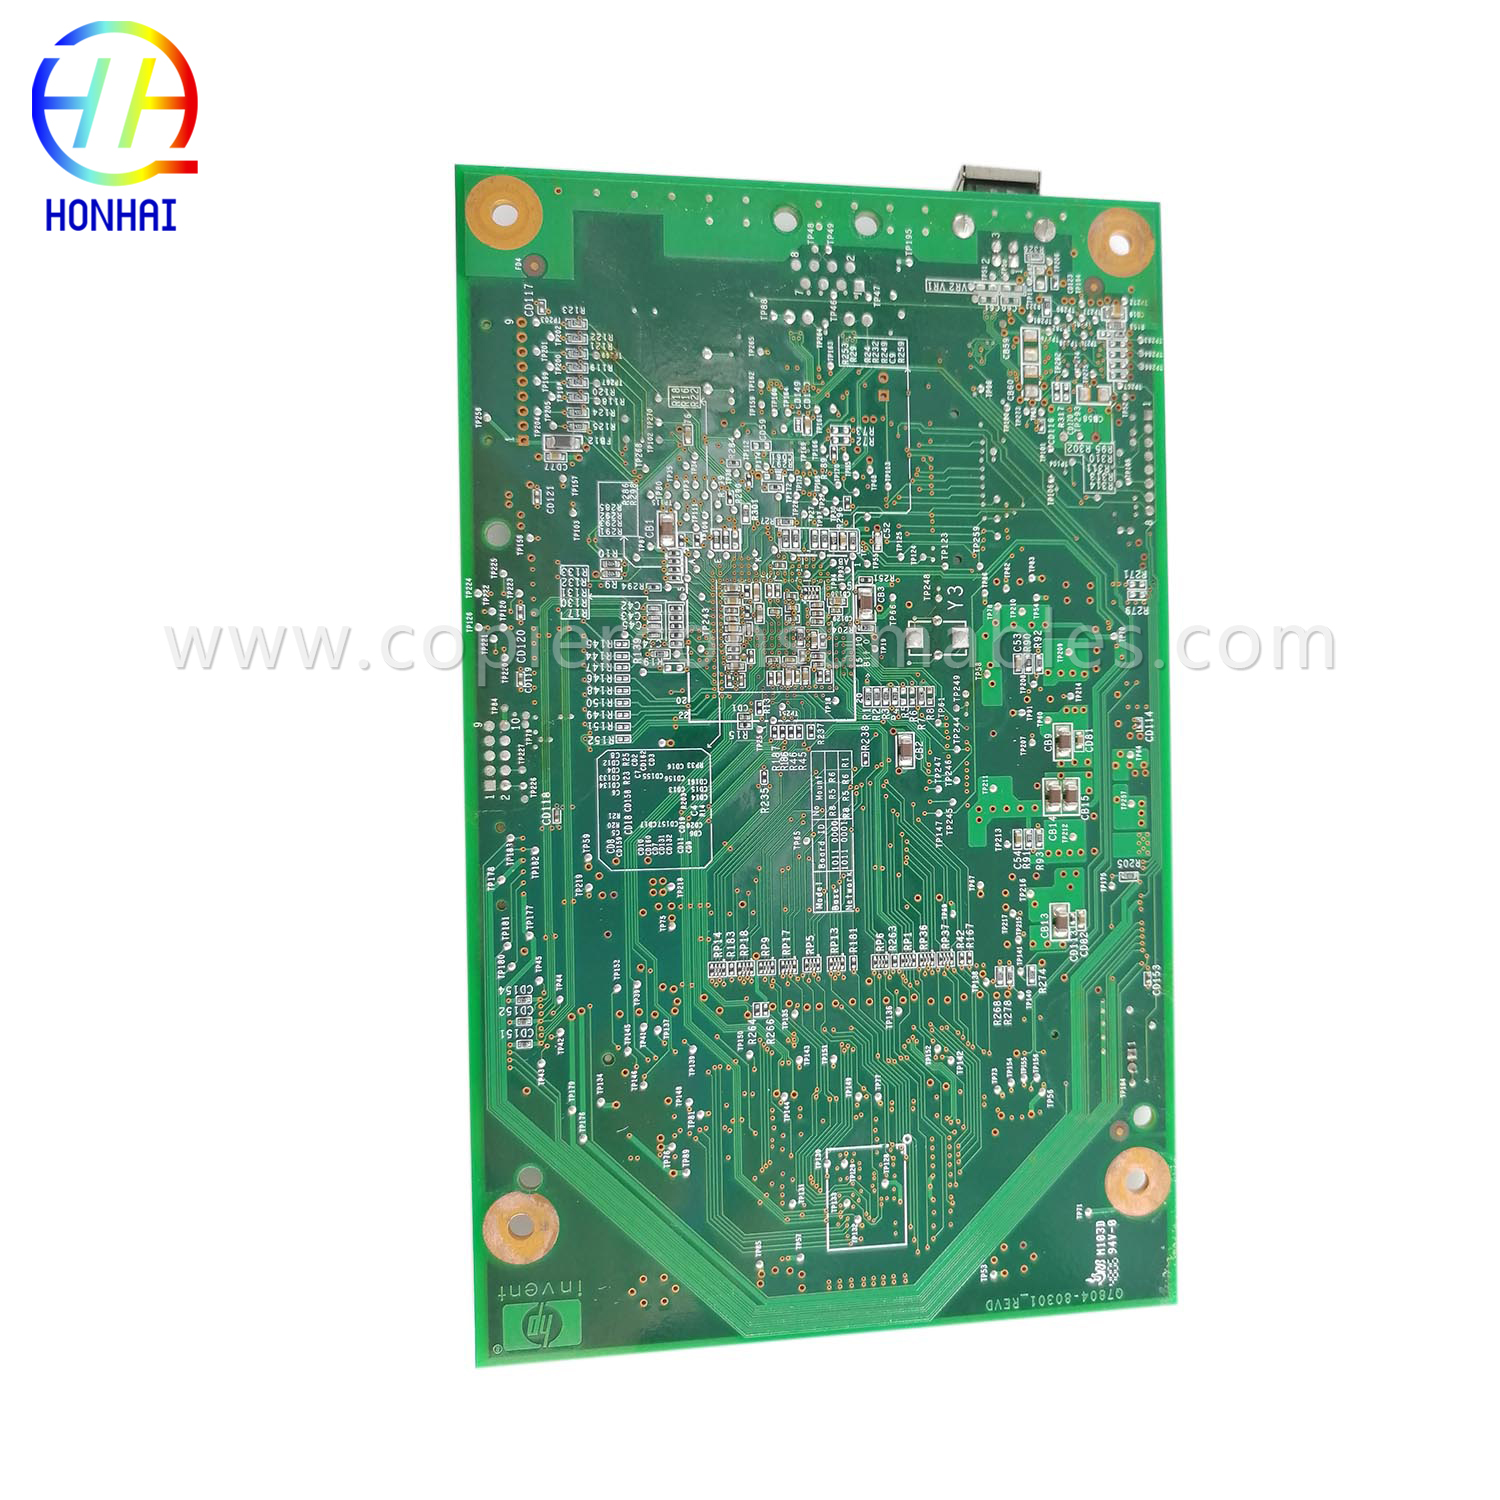 MAIN BOARD FOR HP Laser jet 2015 (8) 拷贝